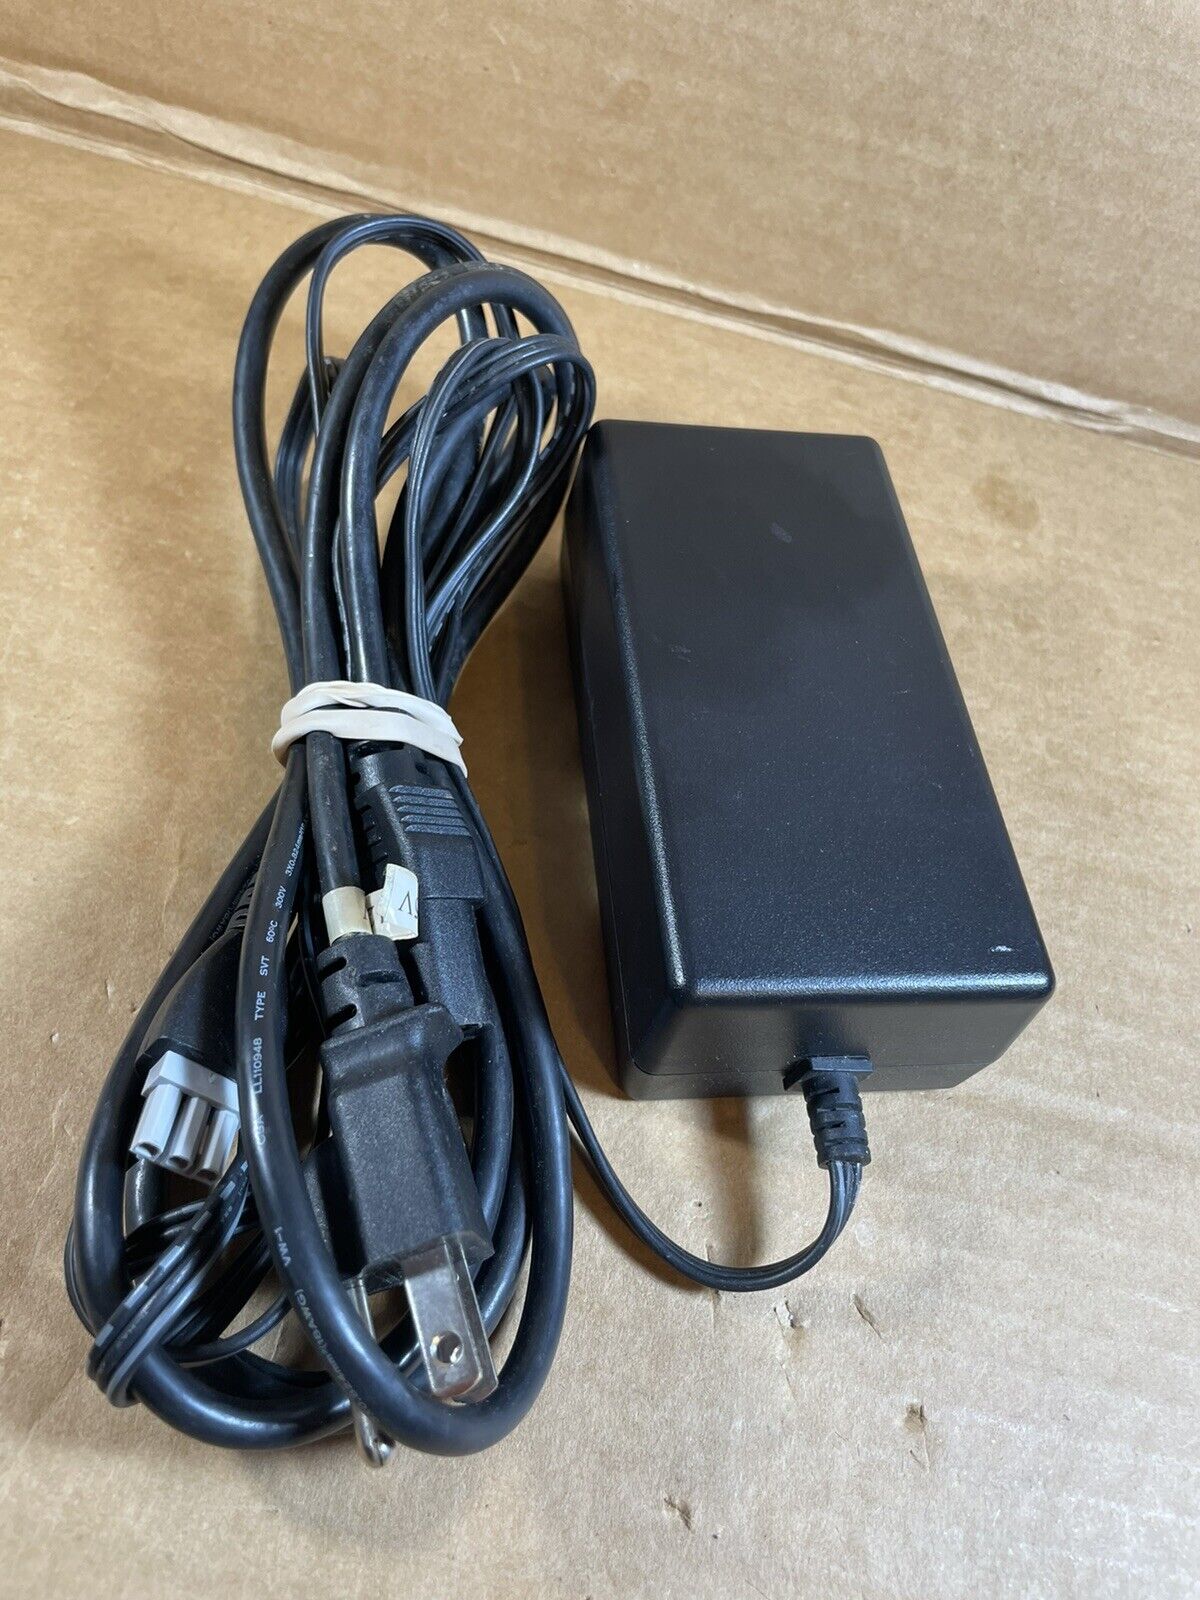 Genuine OEM HP 0950-4466 AC Adapter Officejet and PhotoSmart Printers Untested